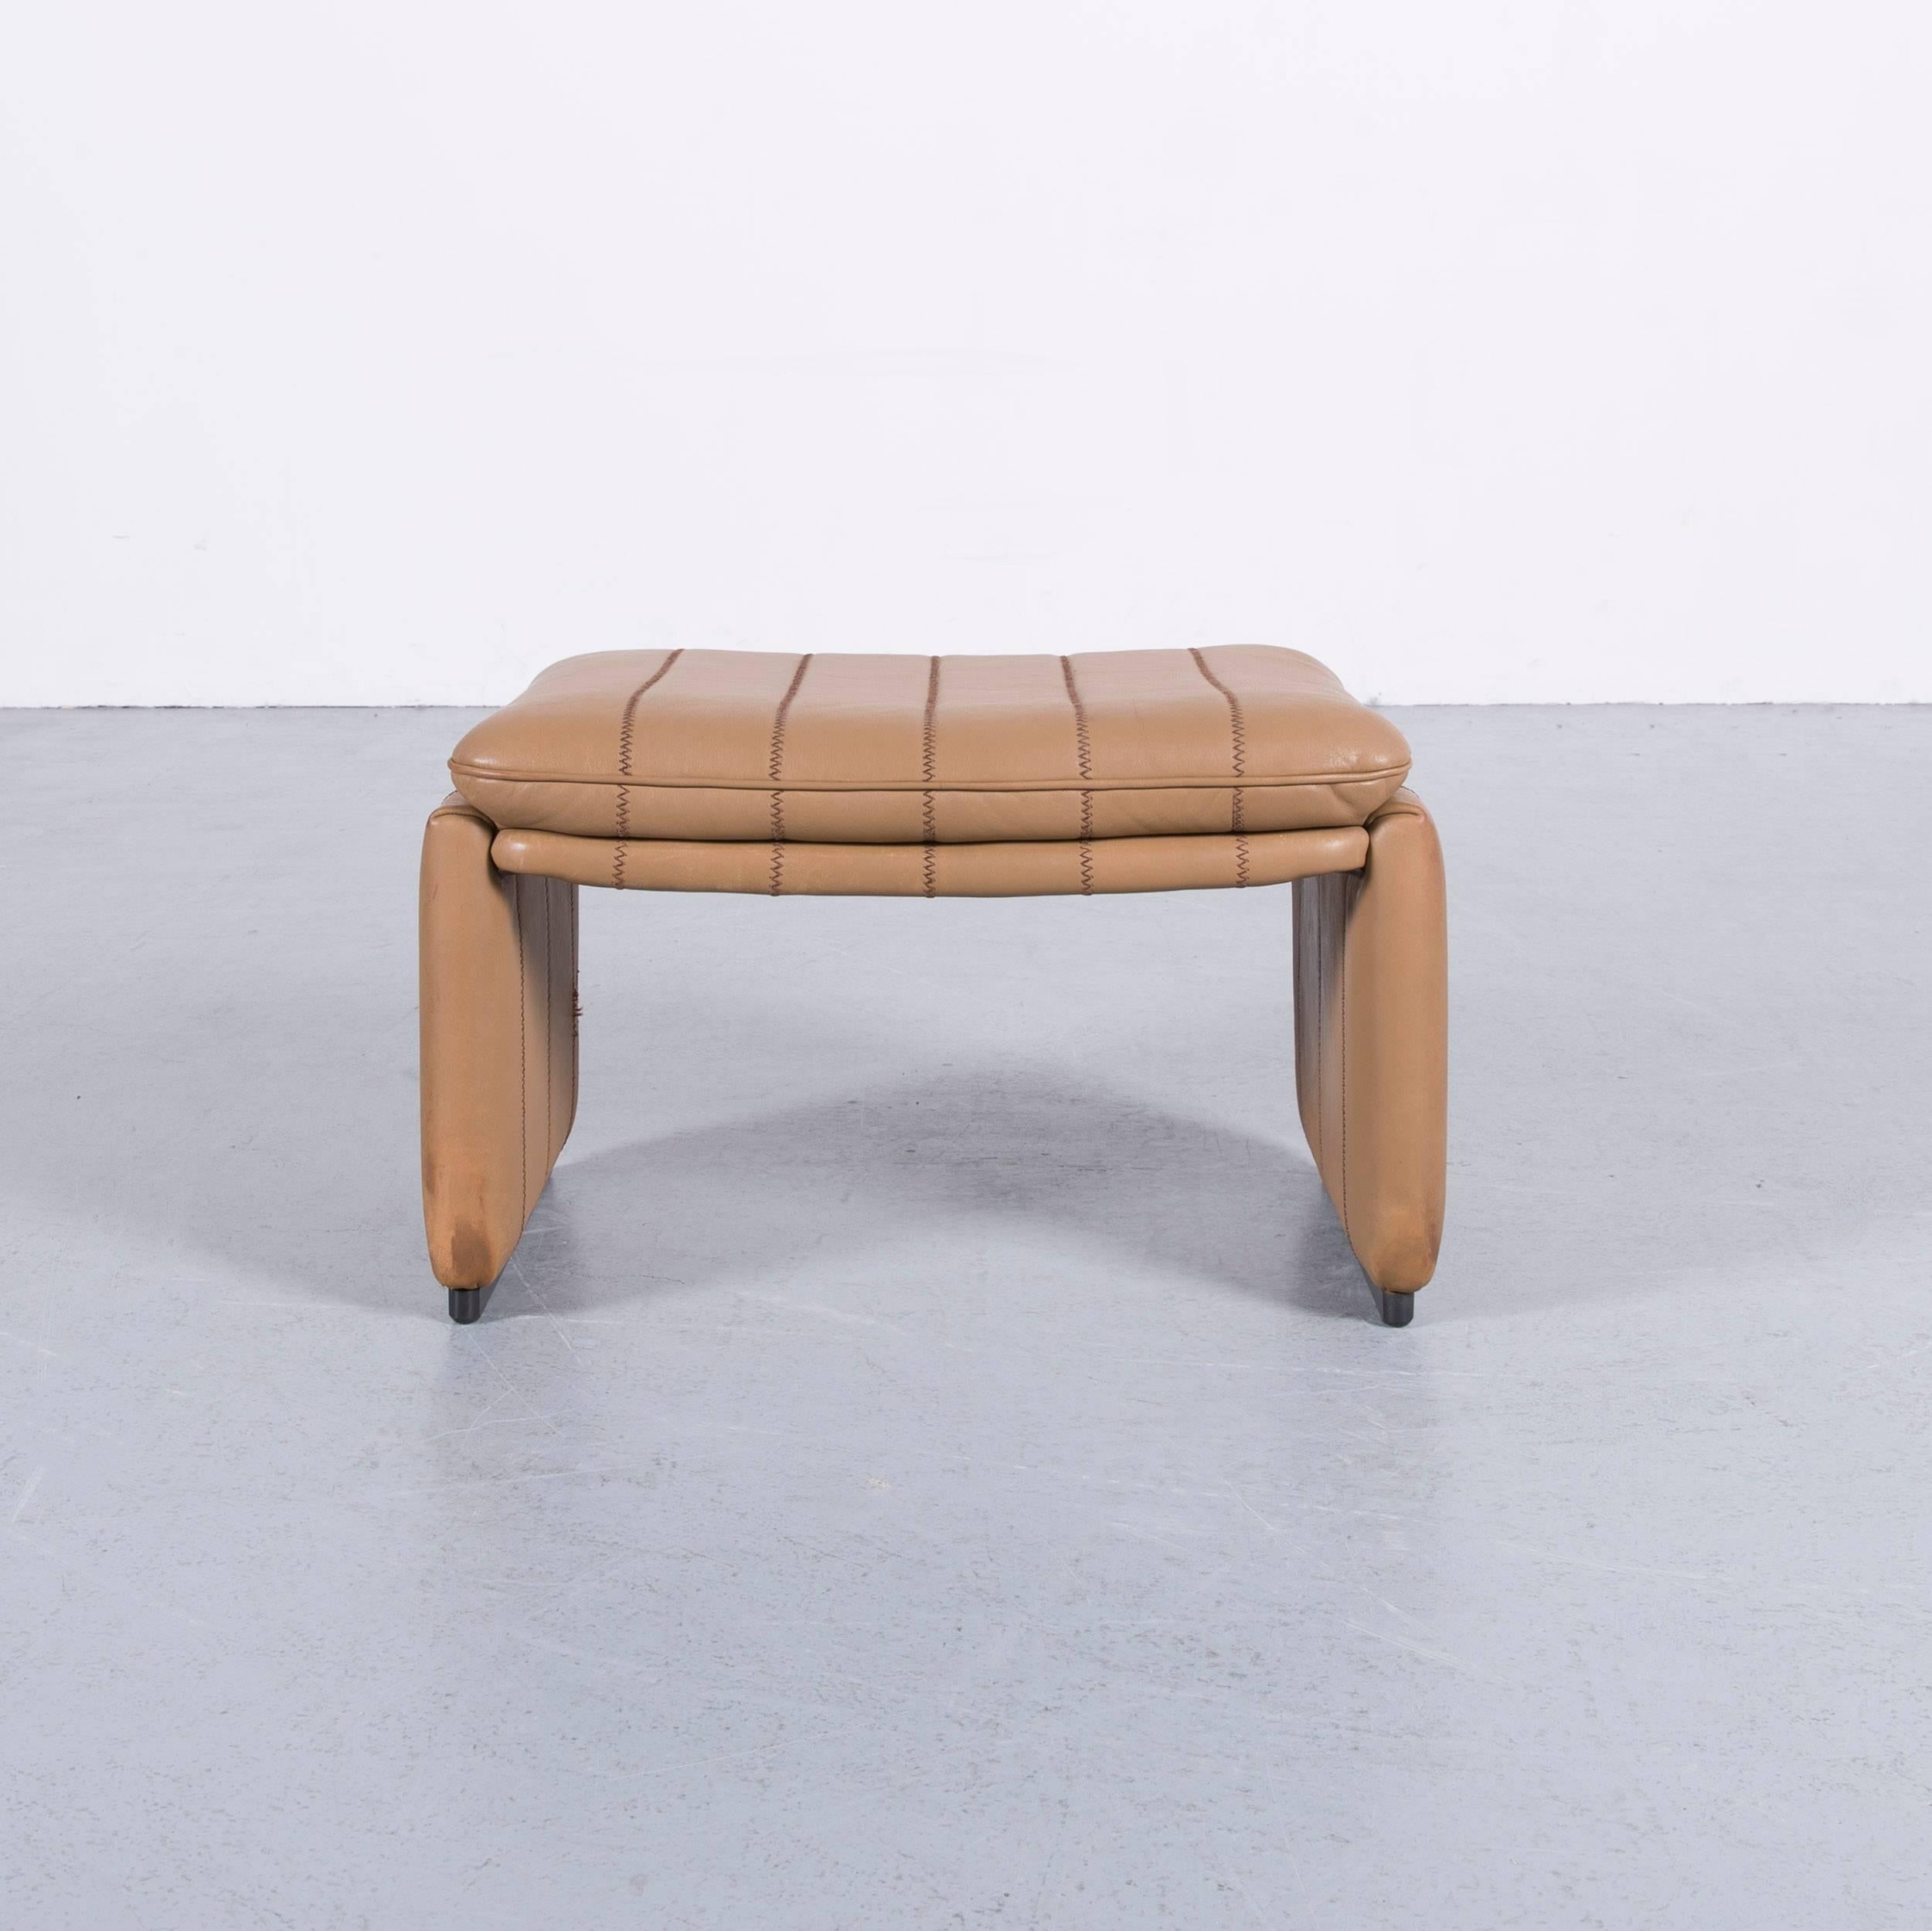 We bring to you an De Sede DS leather foot-stool Cognac brown bench.